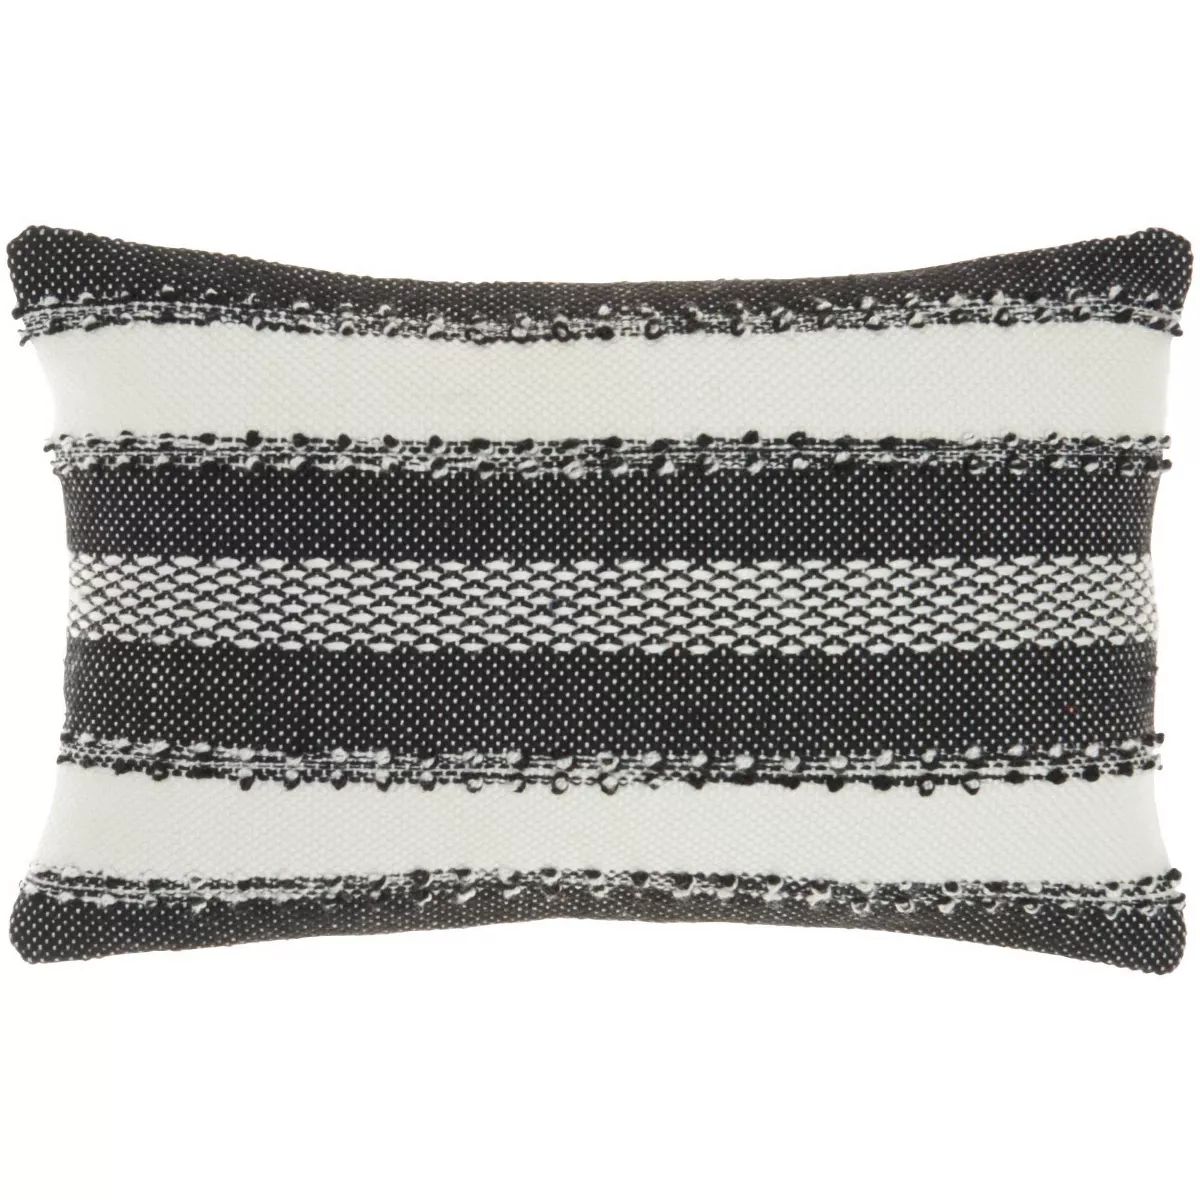 Woven Striped and Dots Indoor/Outdoor Throw Pillow  - Mina Victory | Target